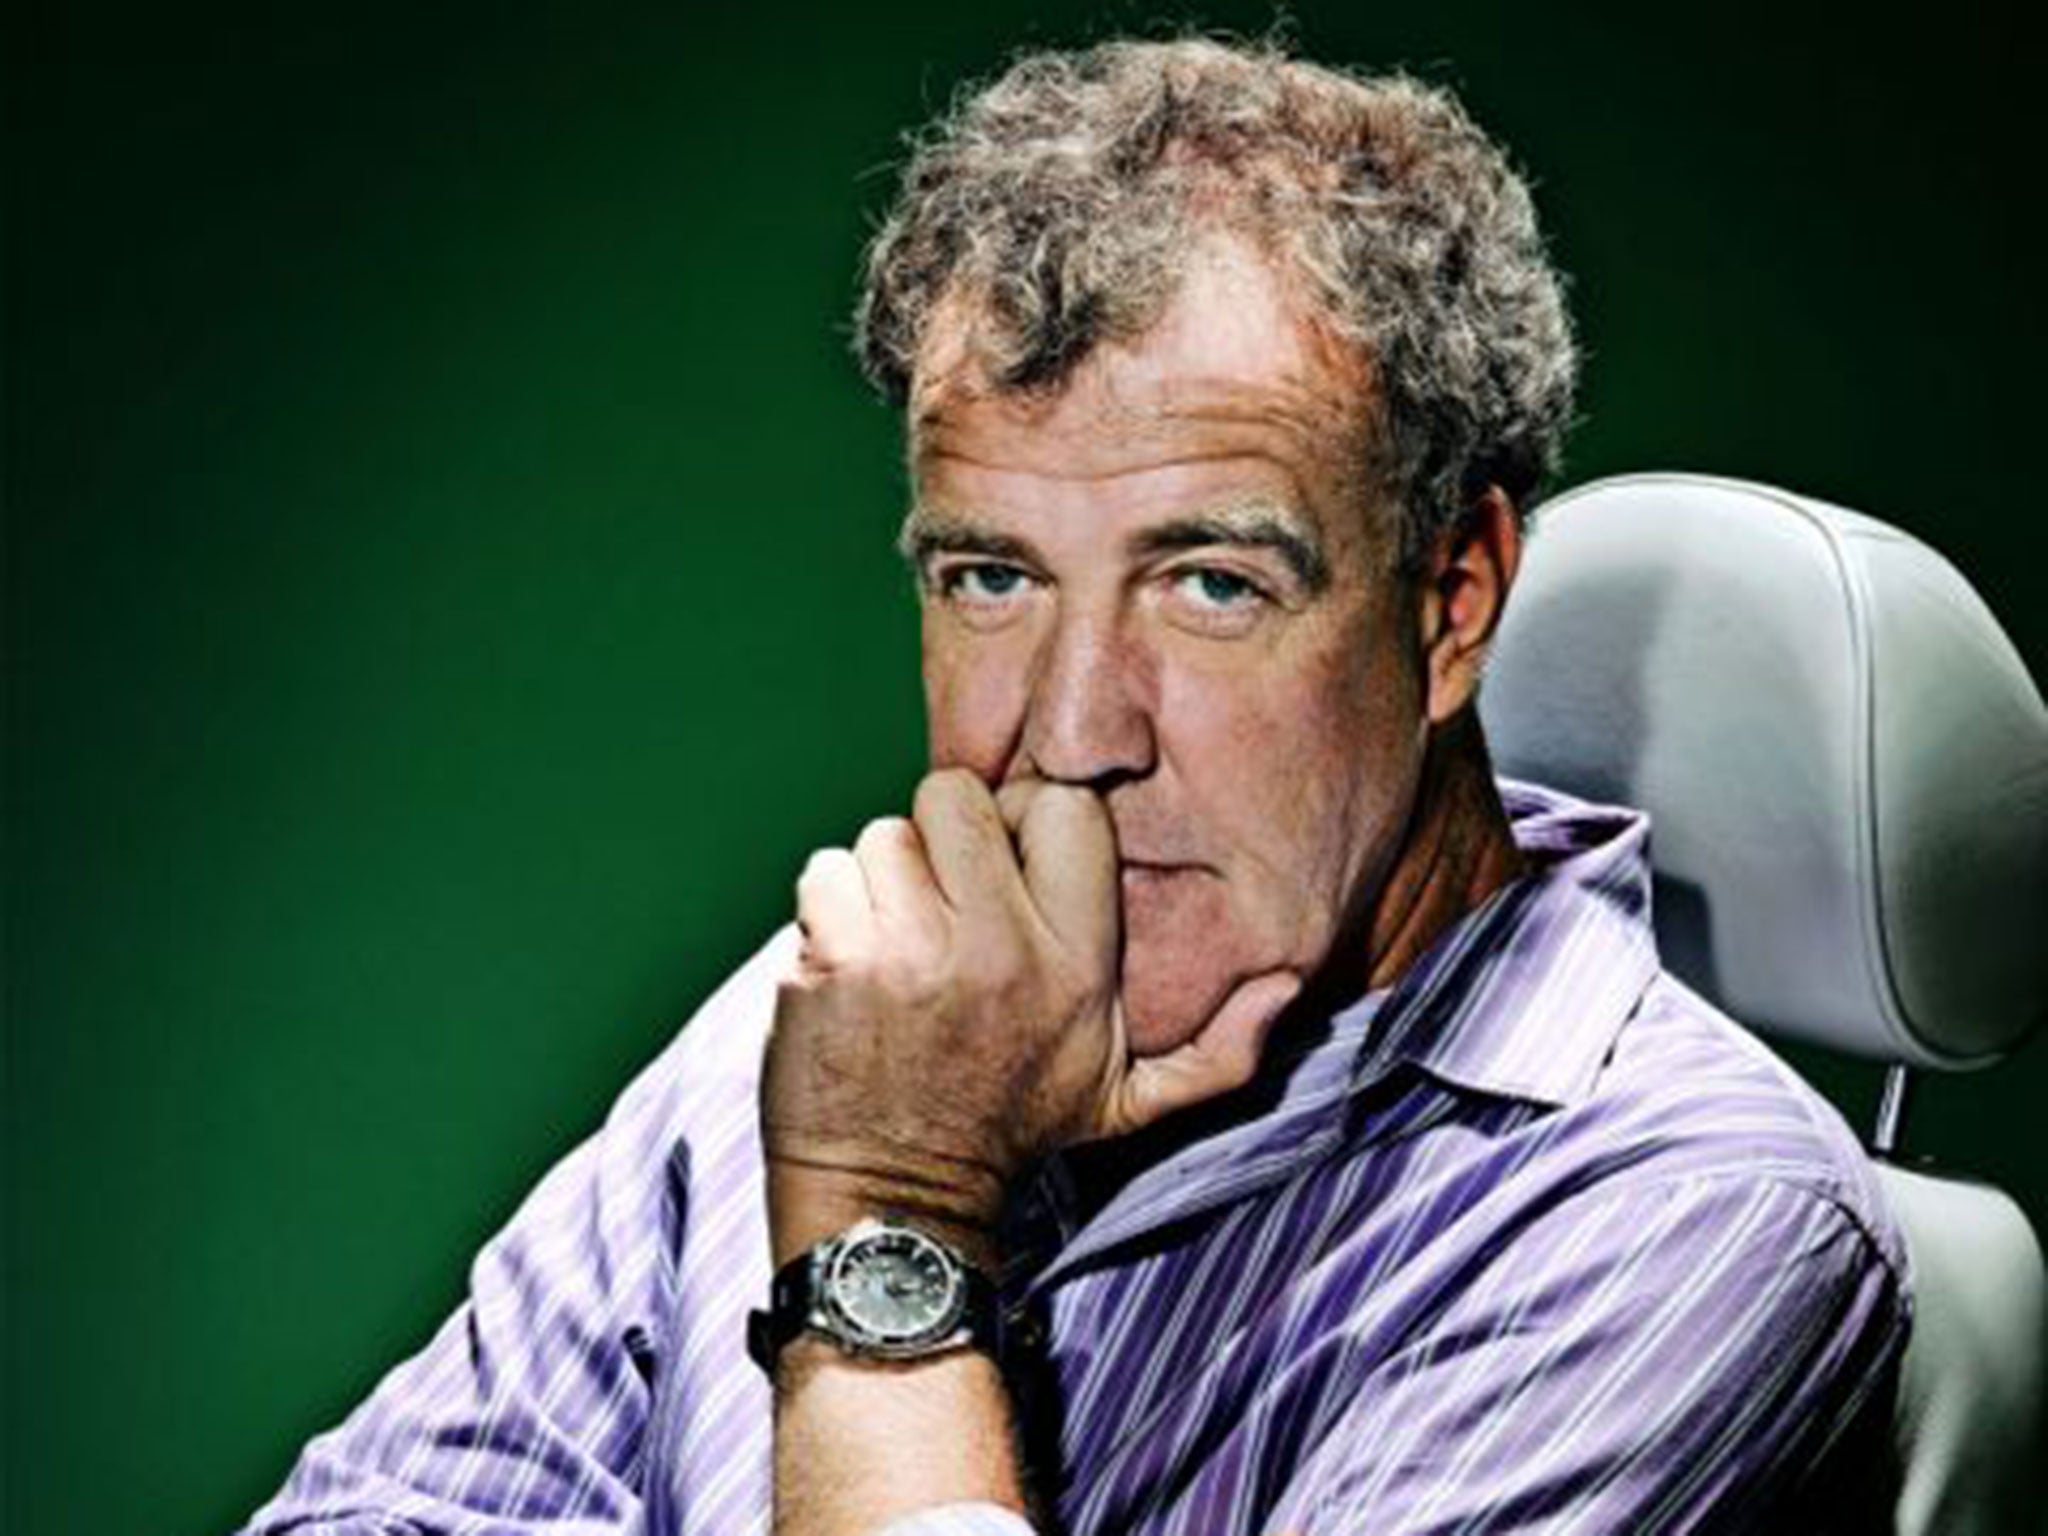 Jeremy Clarkson’s future may lie in the US